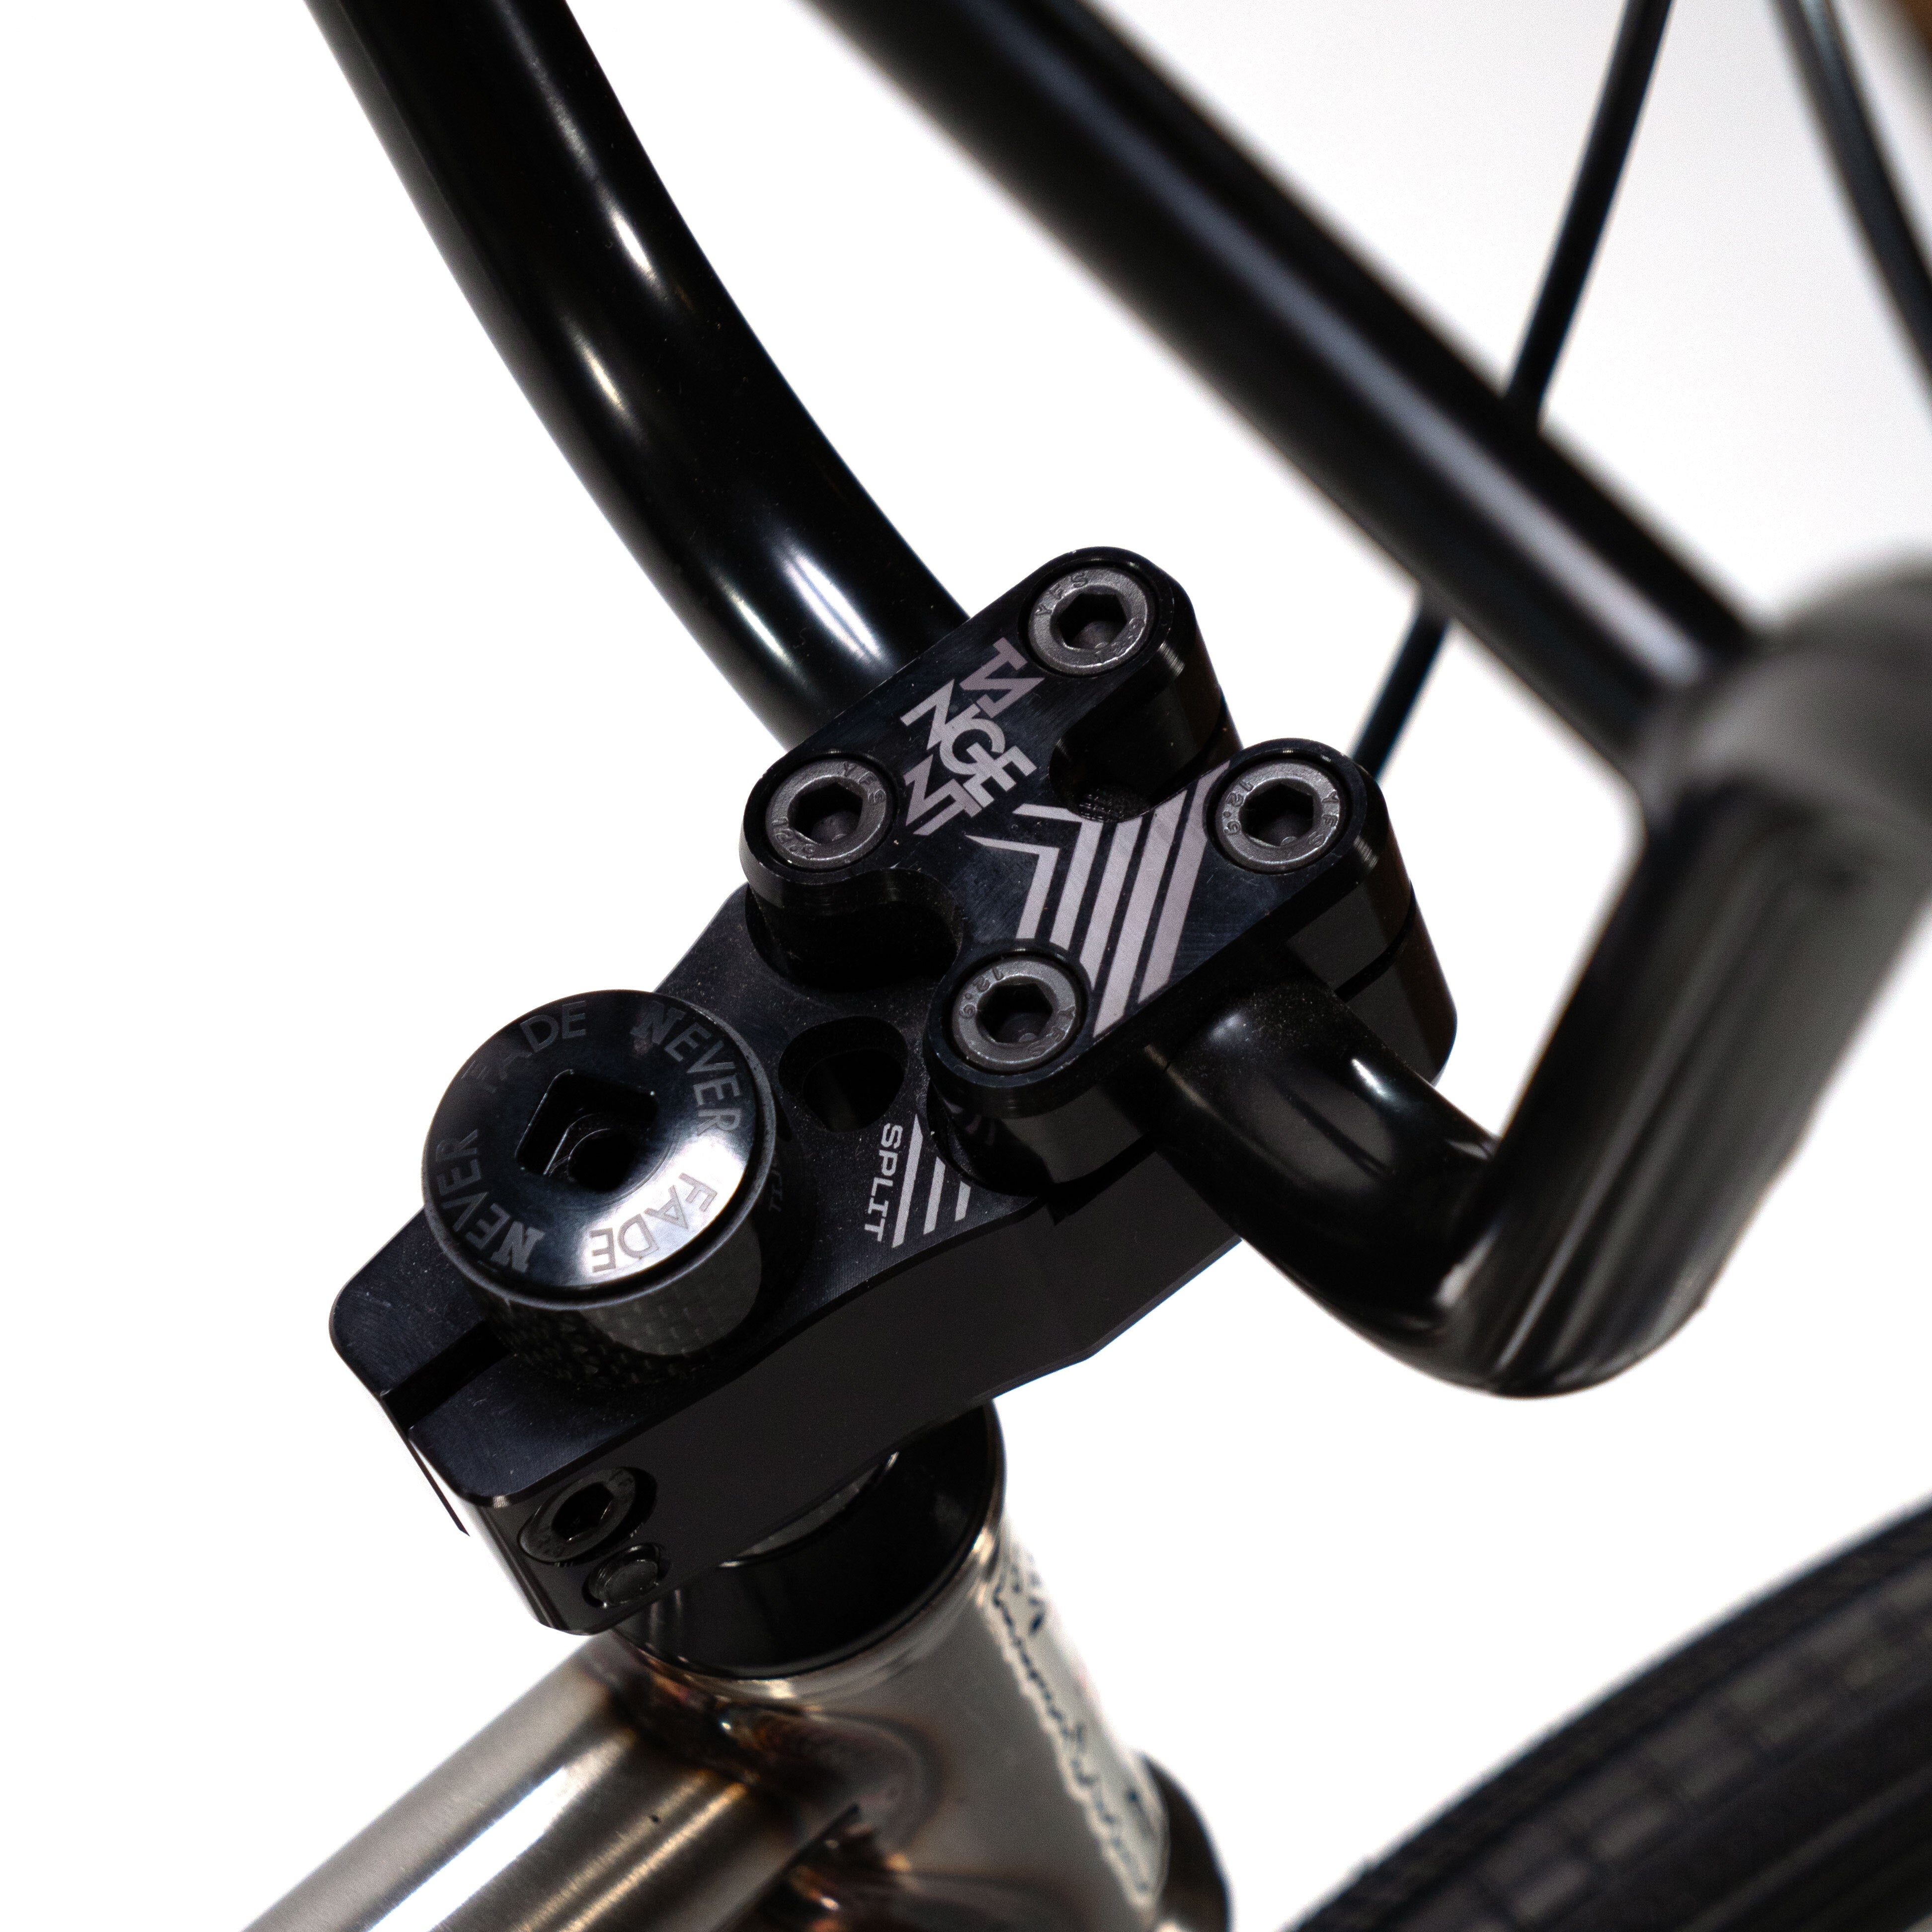 A close up of the handlebar on a Cult Vick Behm Custom Race Bike, showcasing its performance and style.